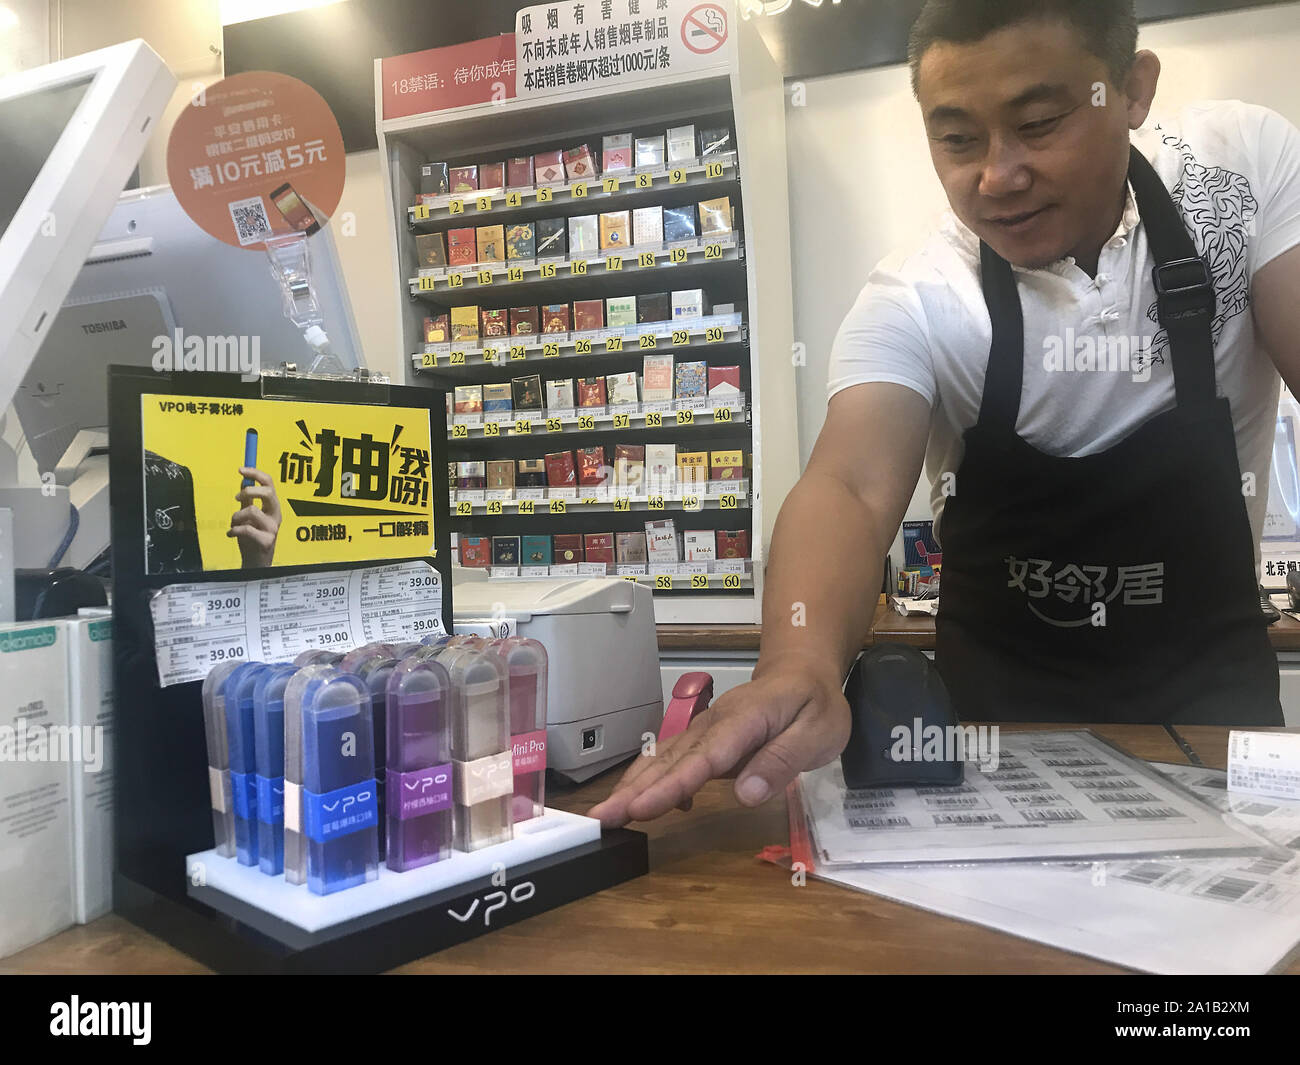 Beijing, China. 25th Sep, 2019. E-cigarettes are sold in a grocery store in downtown Beijing on Wednesday, September 25, 2019. China, the world's largest tobacco market, may introduce regulations for the e-cigarette industry as early as next month amid growing health concerns and reports that some products contain toxic chemicals, according to state media. Photo by Stephen Shaver/UPI Credit: UPI/Alamy Live News Stock Photo